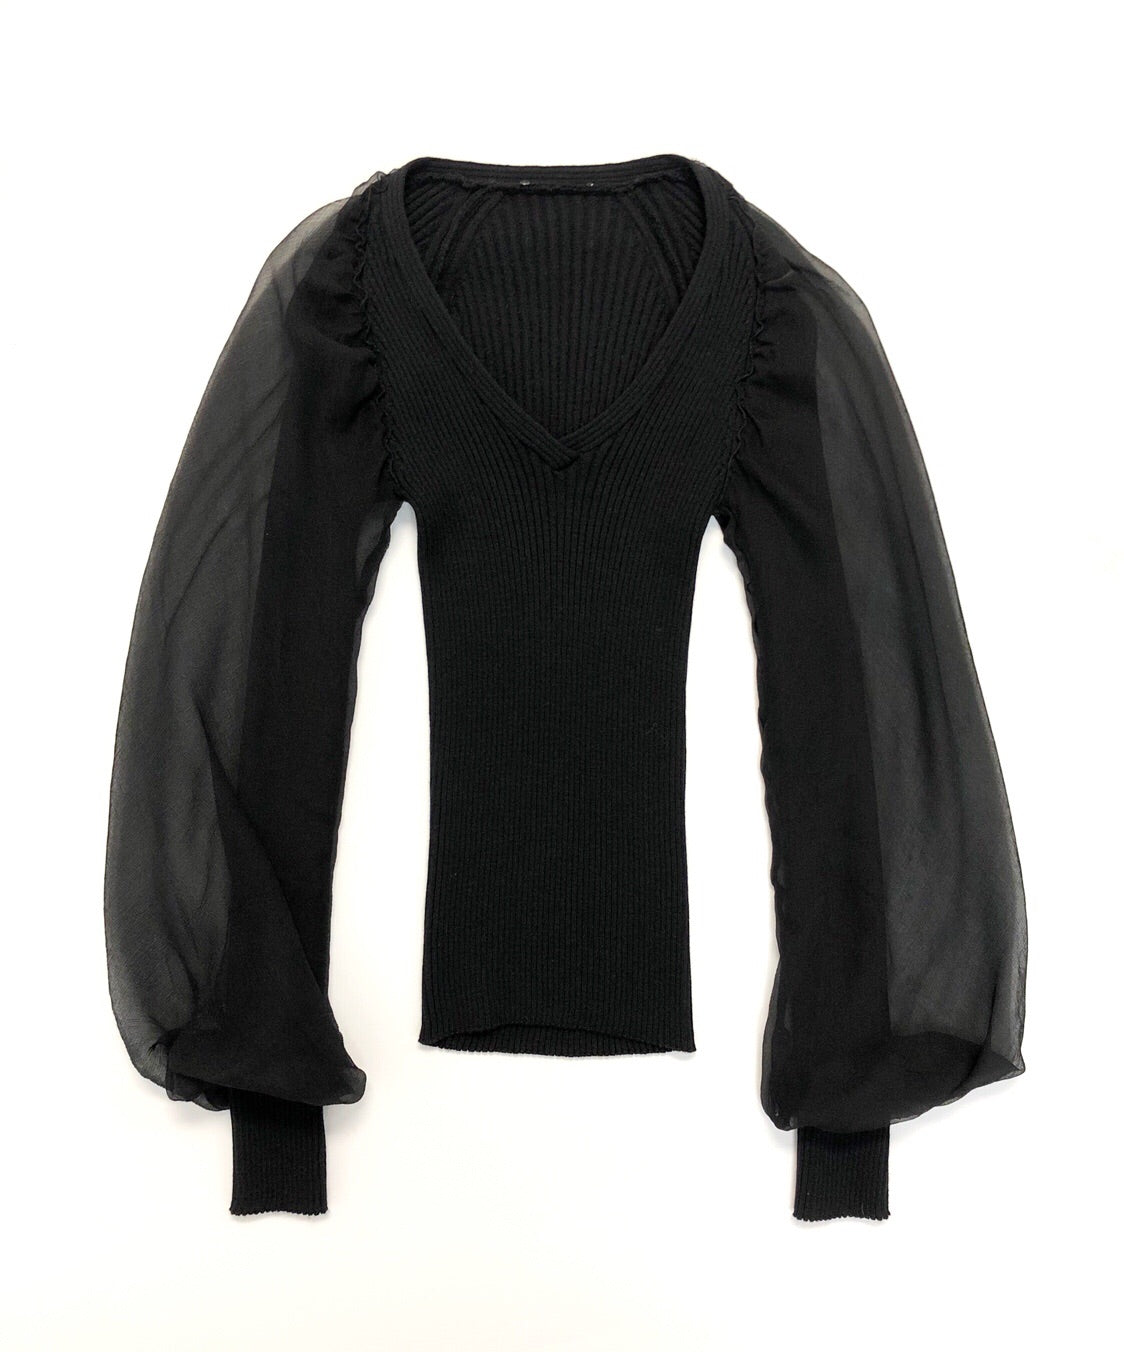 Jean Paul Gaultier Black Knit and Chiffon Top